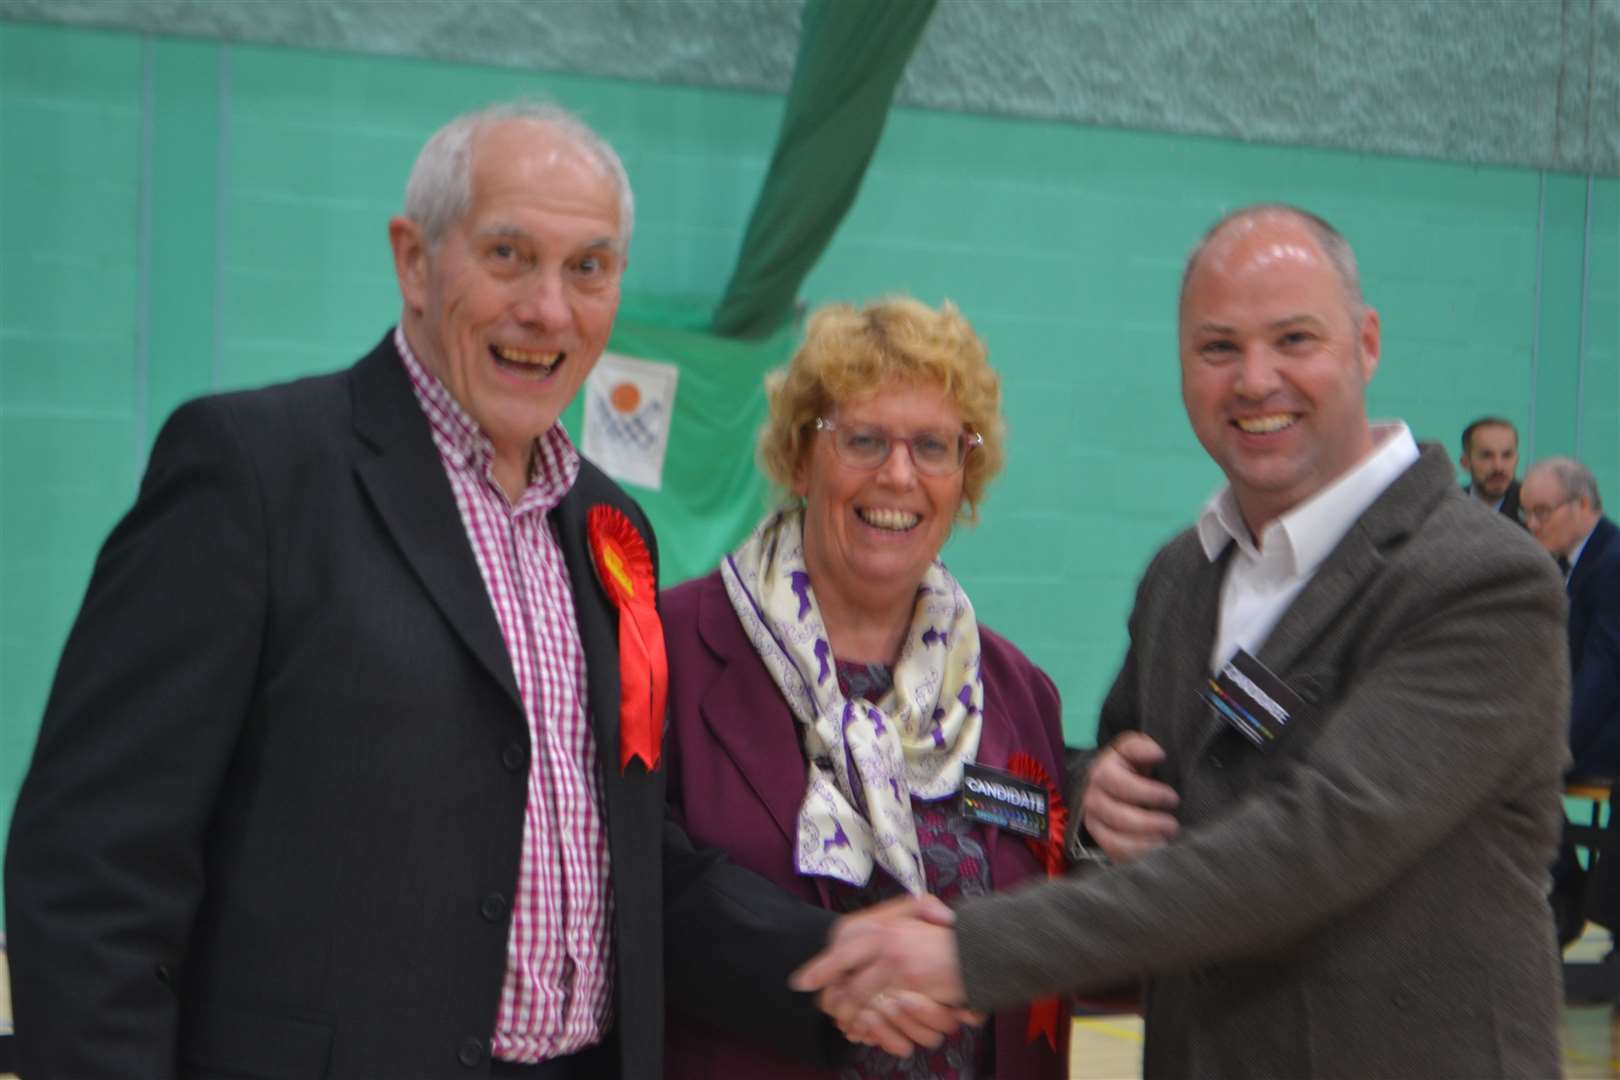 The meeting was organised by newly elected councillors John Lloyd, Hazel Browne-Williams and Mark Prenter